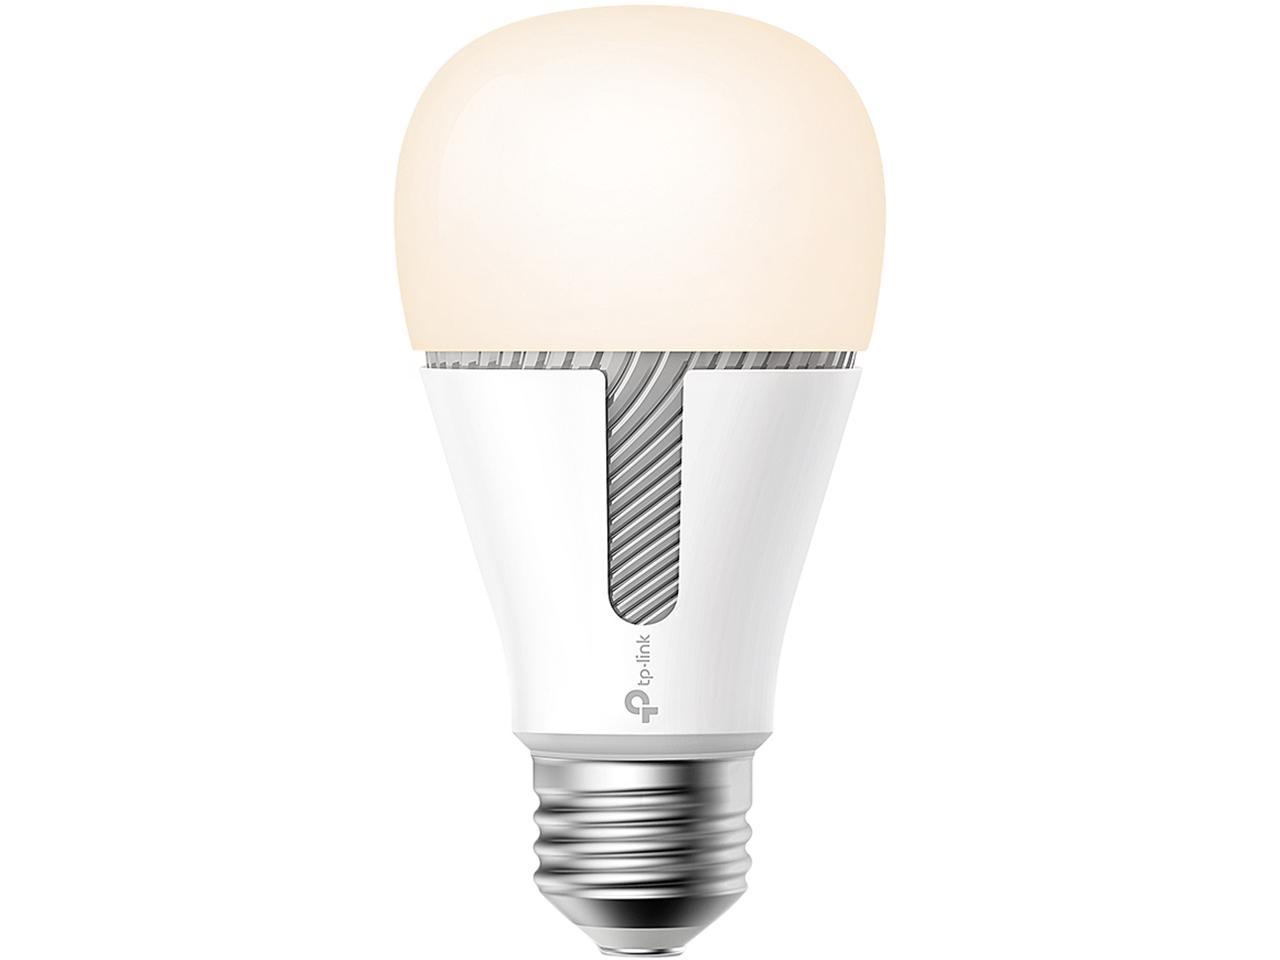 Kasa Smart Wi-Fi LED Light Bulb by TP-Link - Tunable White, Dimmable, A19, No Hub Required, Works with Alexa and Google Assistant, Title 20, Energy Star Certified